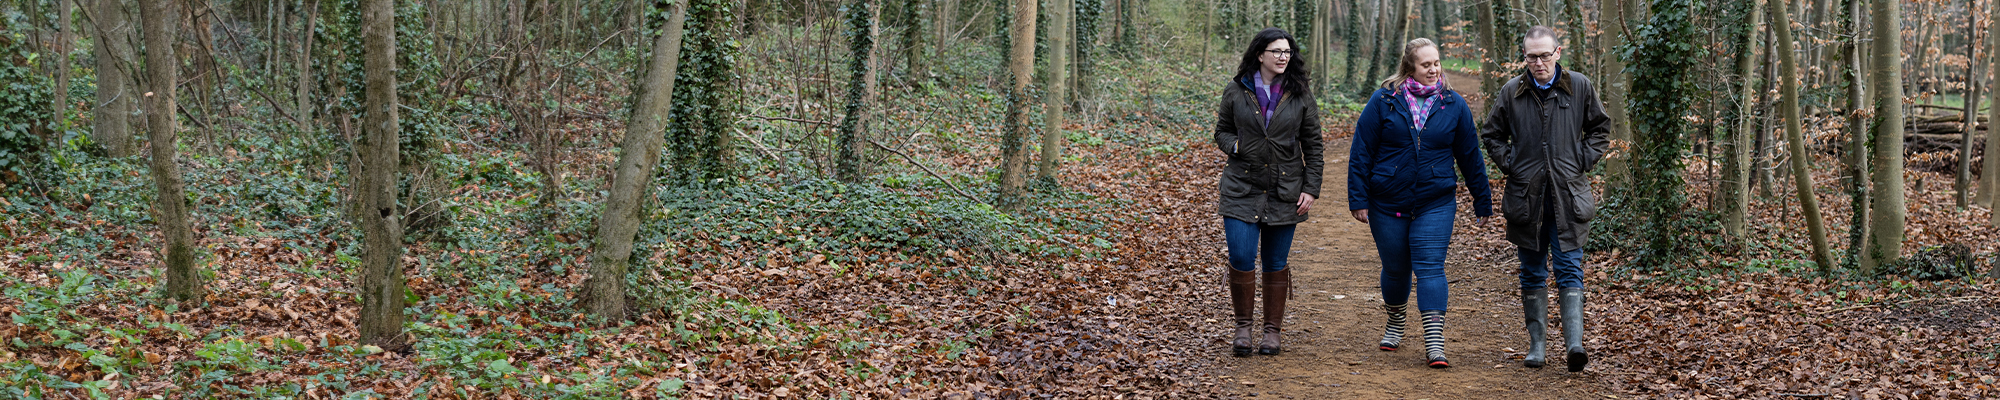 two women and one man walking in a forest. There are lots of leaves on the floor and trees on both side of their pathway. They are all wearing wellies, and smiling and laughing as they walk